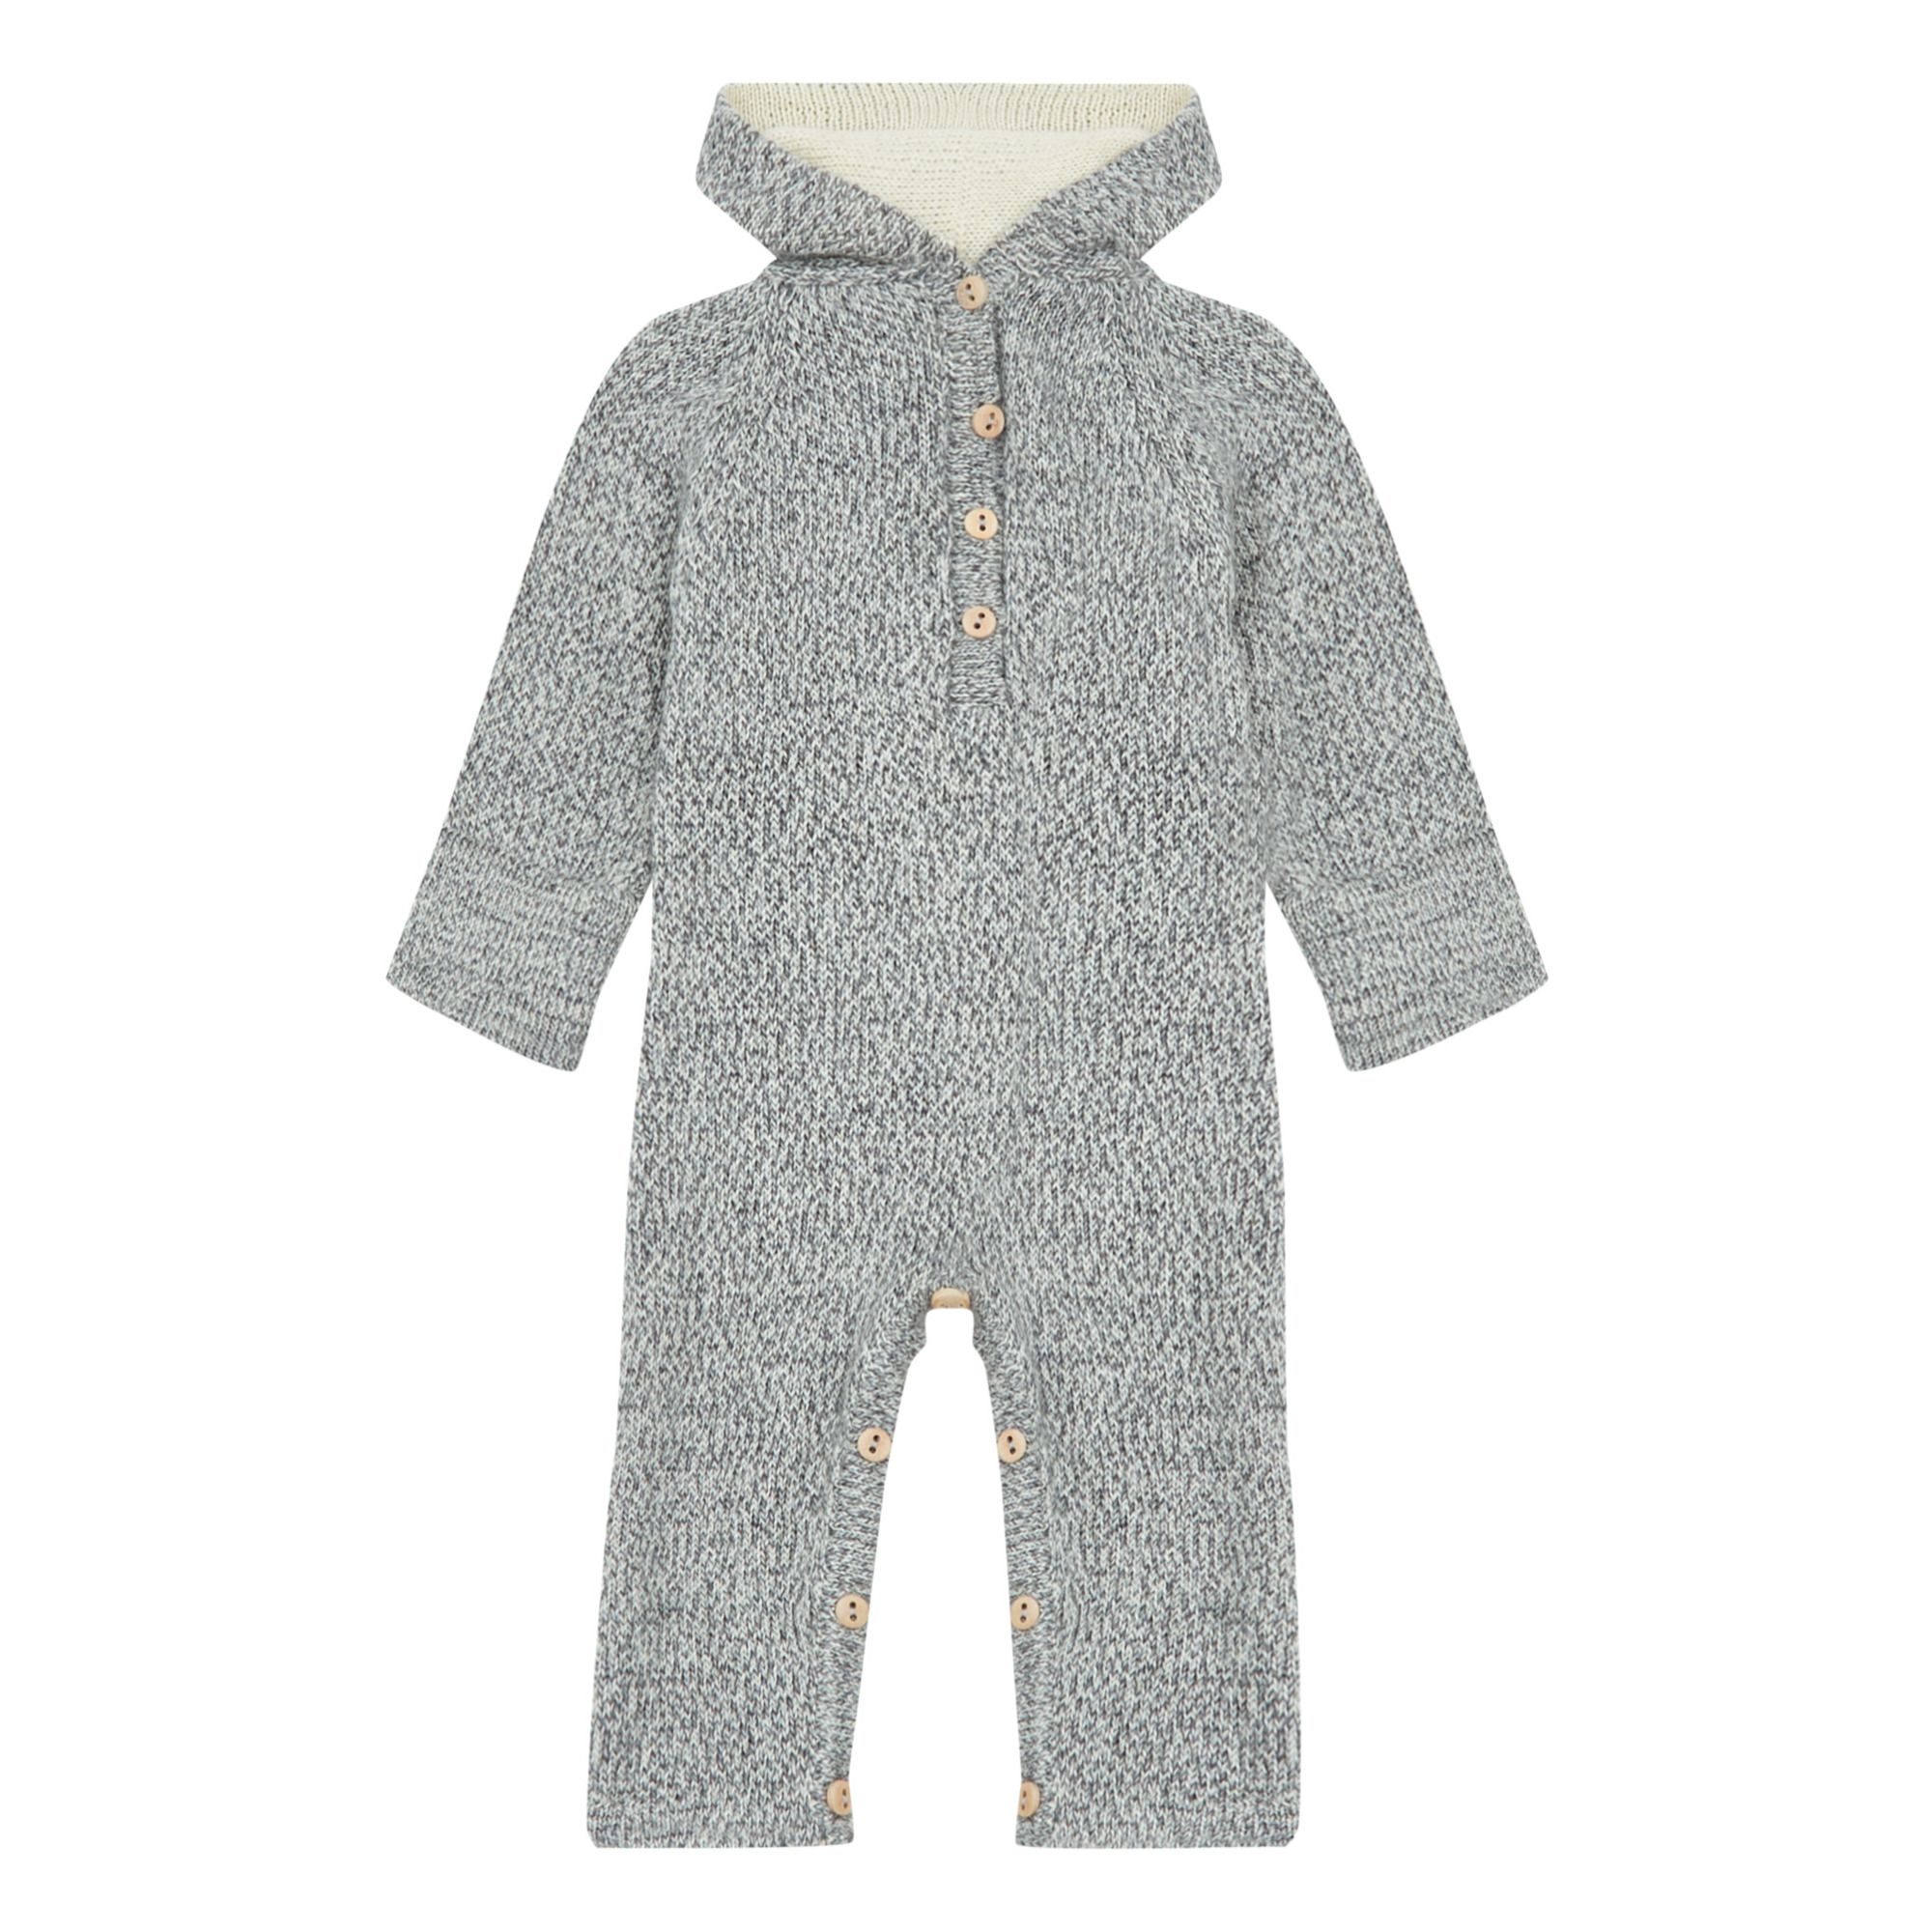 Oeuf NYC - Combinaison Capuche Lapin Baby Alpaca - Fille - Gris